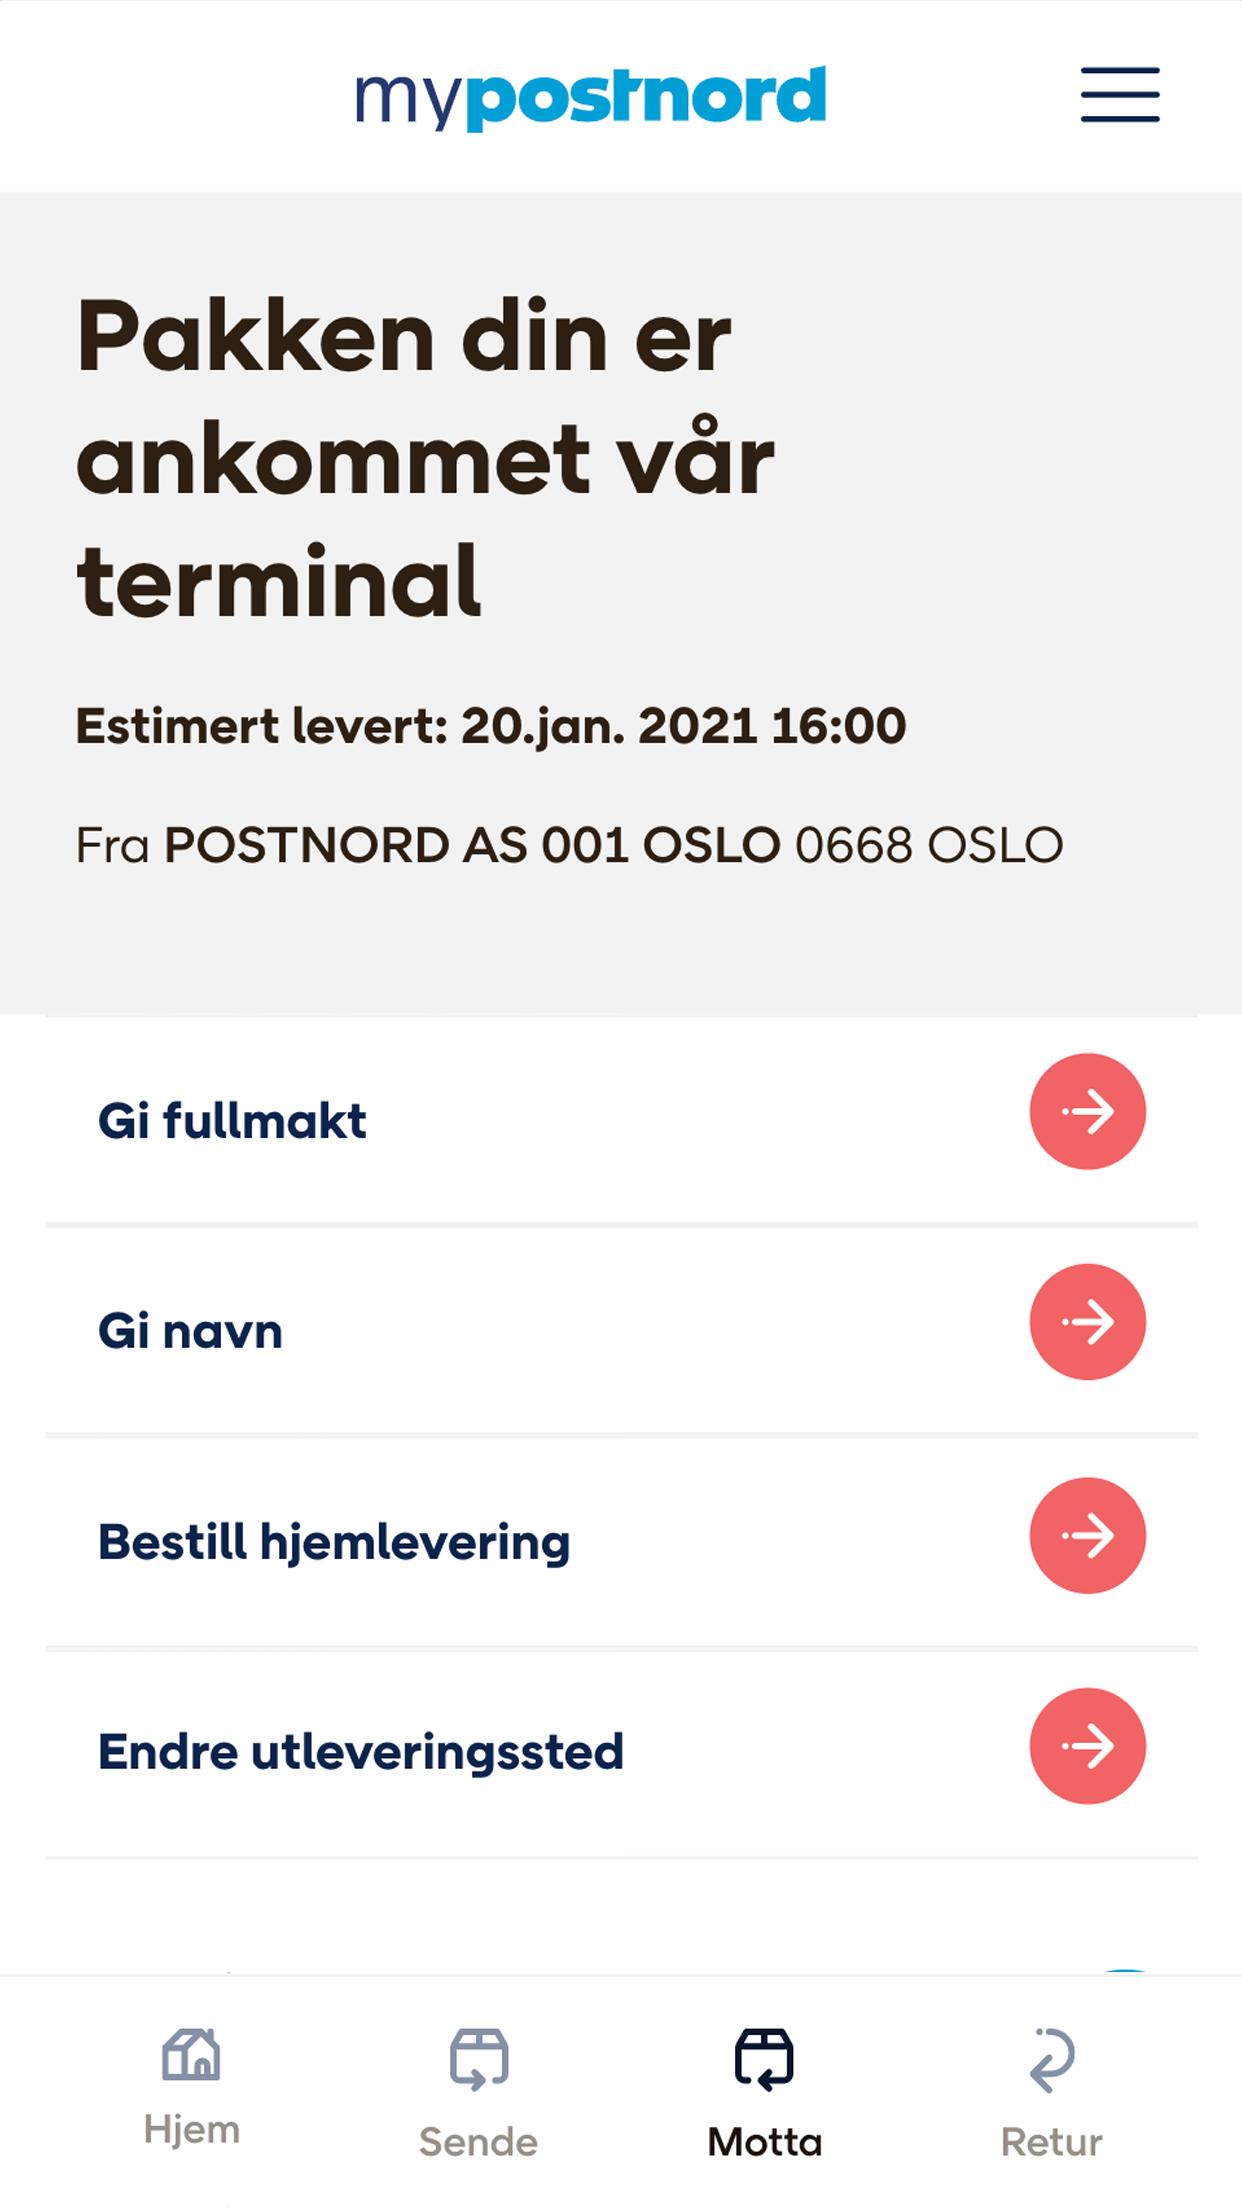 mypostnord for Android - APK Download